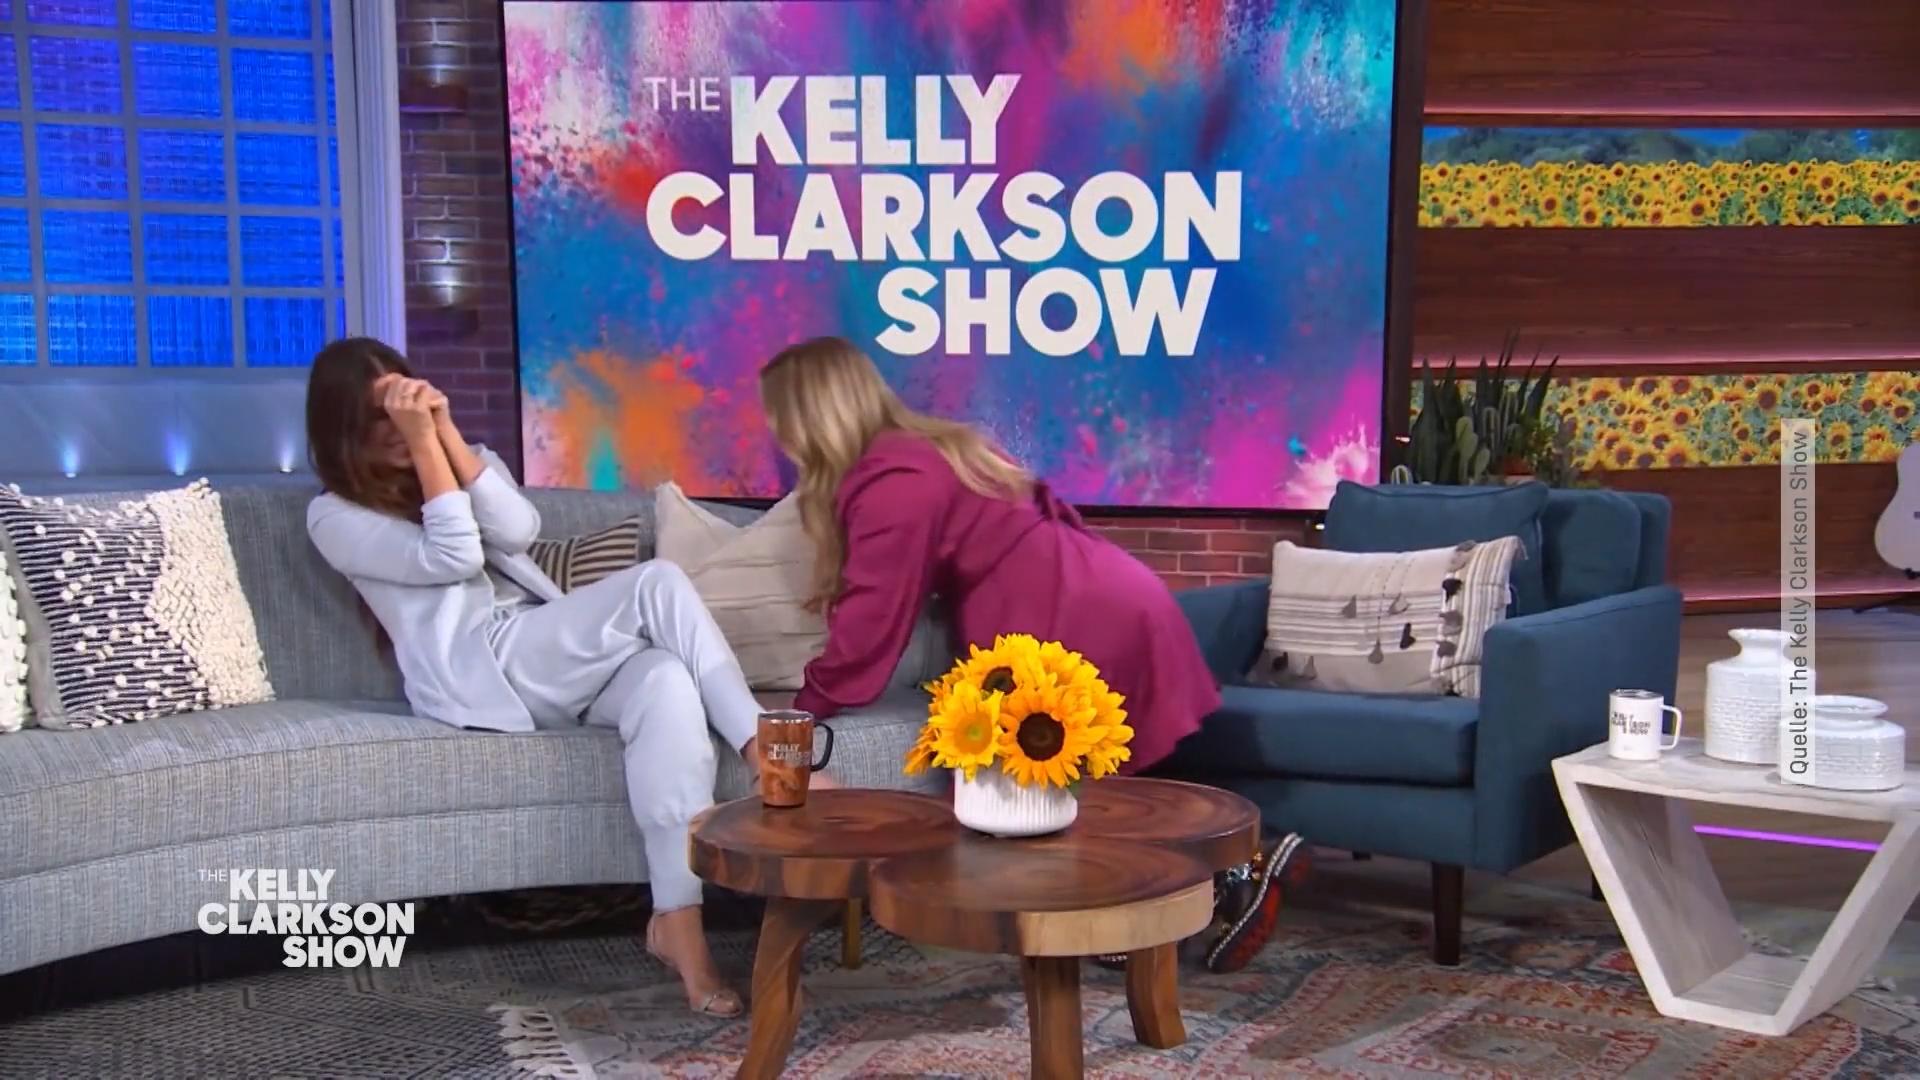 Sandra Bullock & Kelly Clarkson Go Viral With Interview Laughter On TV Show